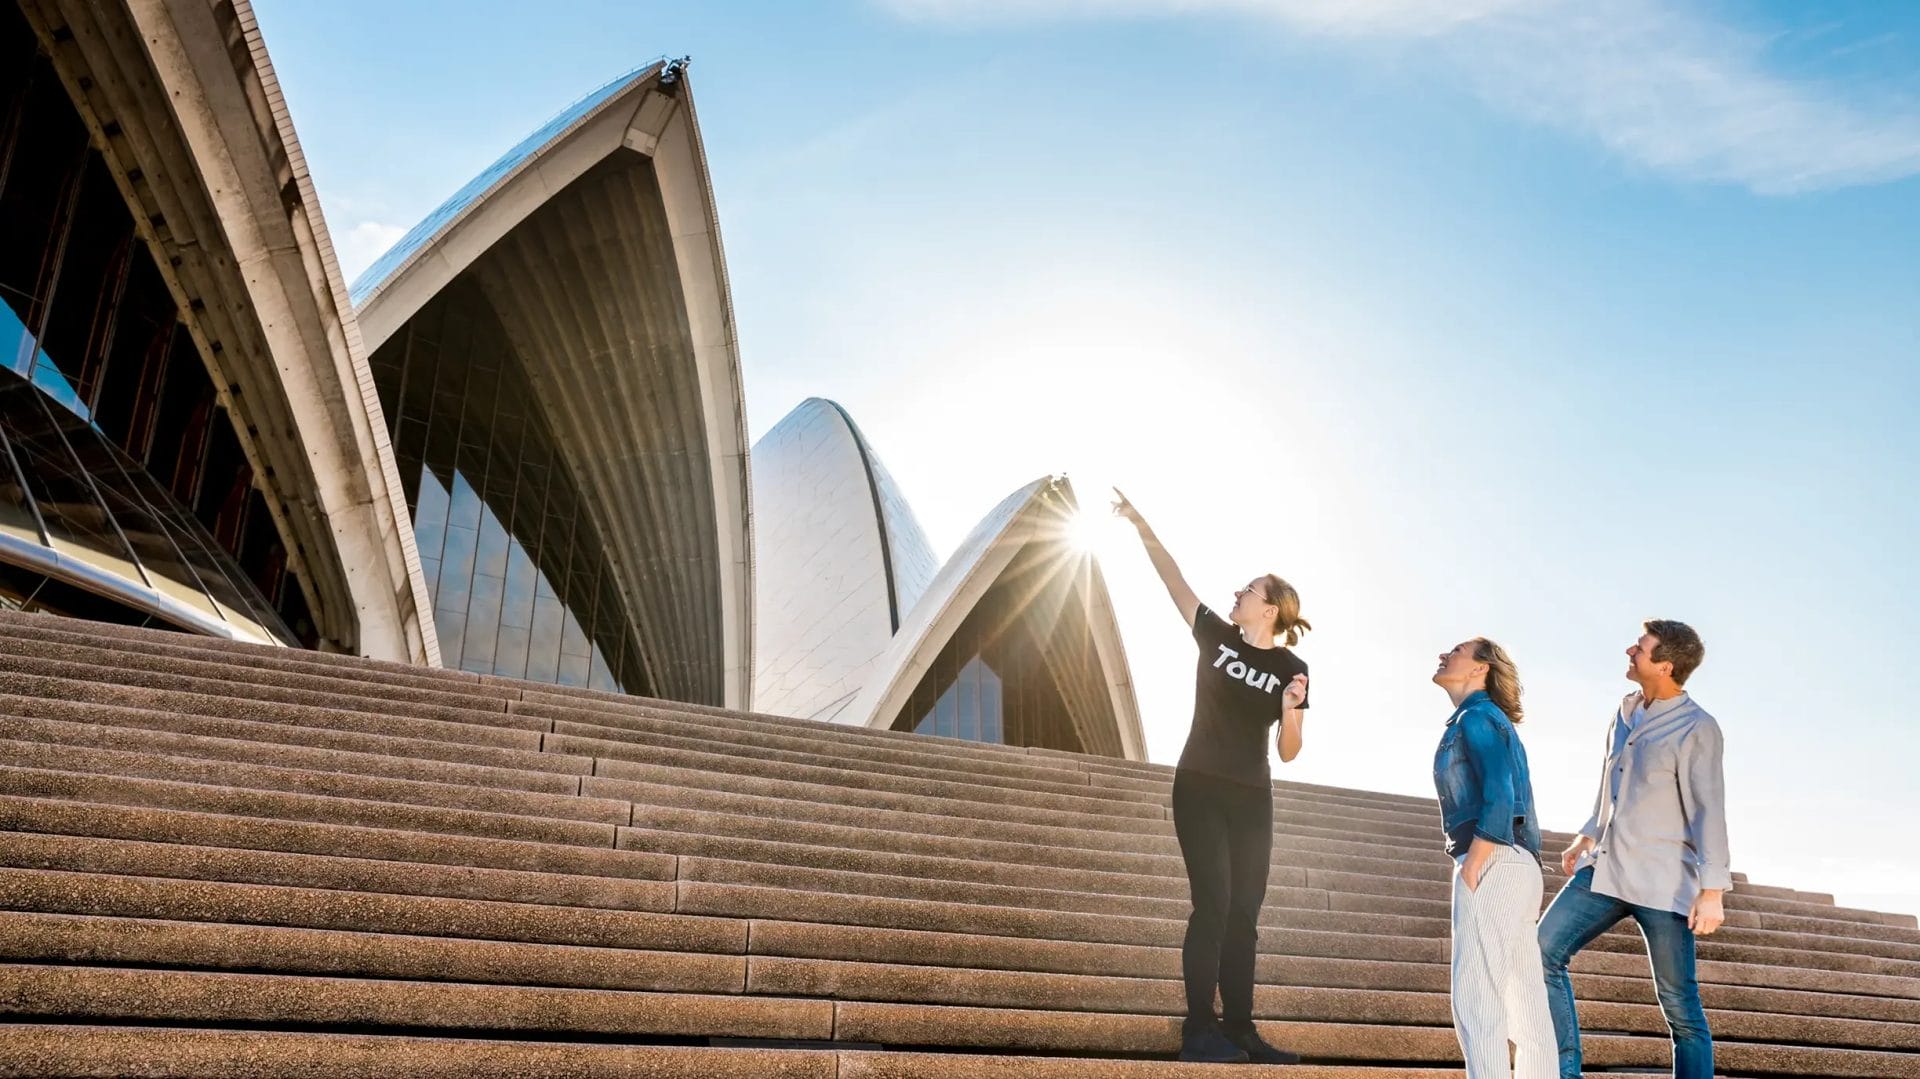 Guests being shown around the exterior of the Sydney Opera House by a guide